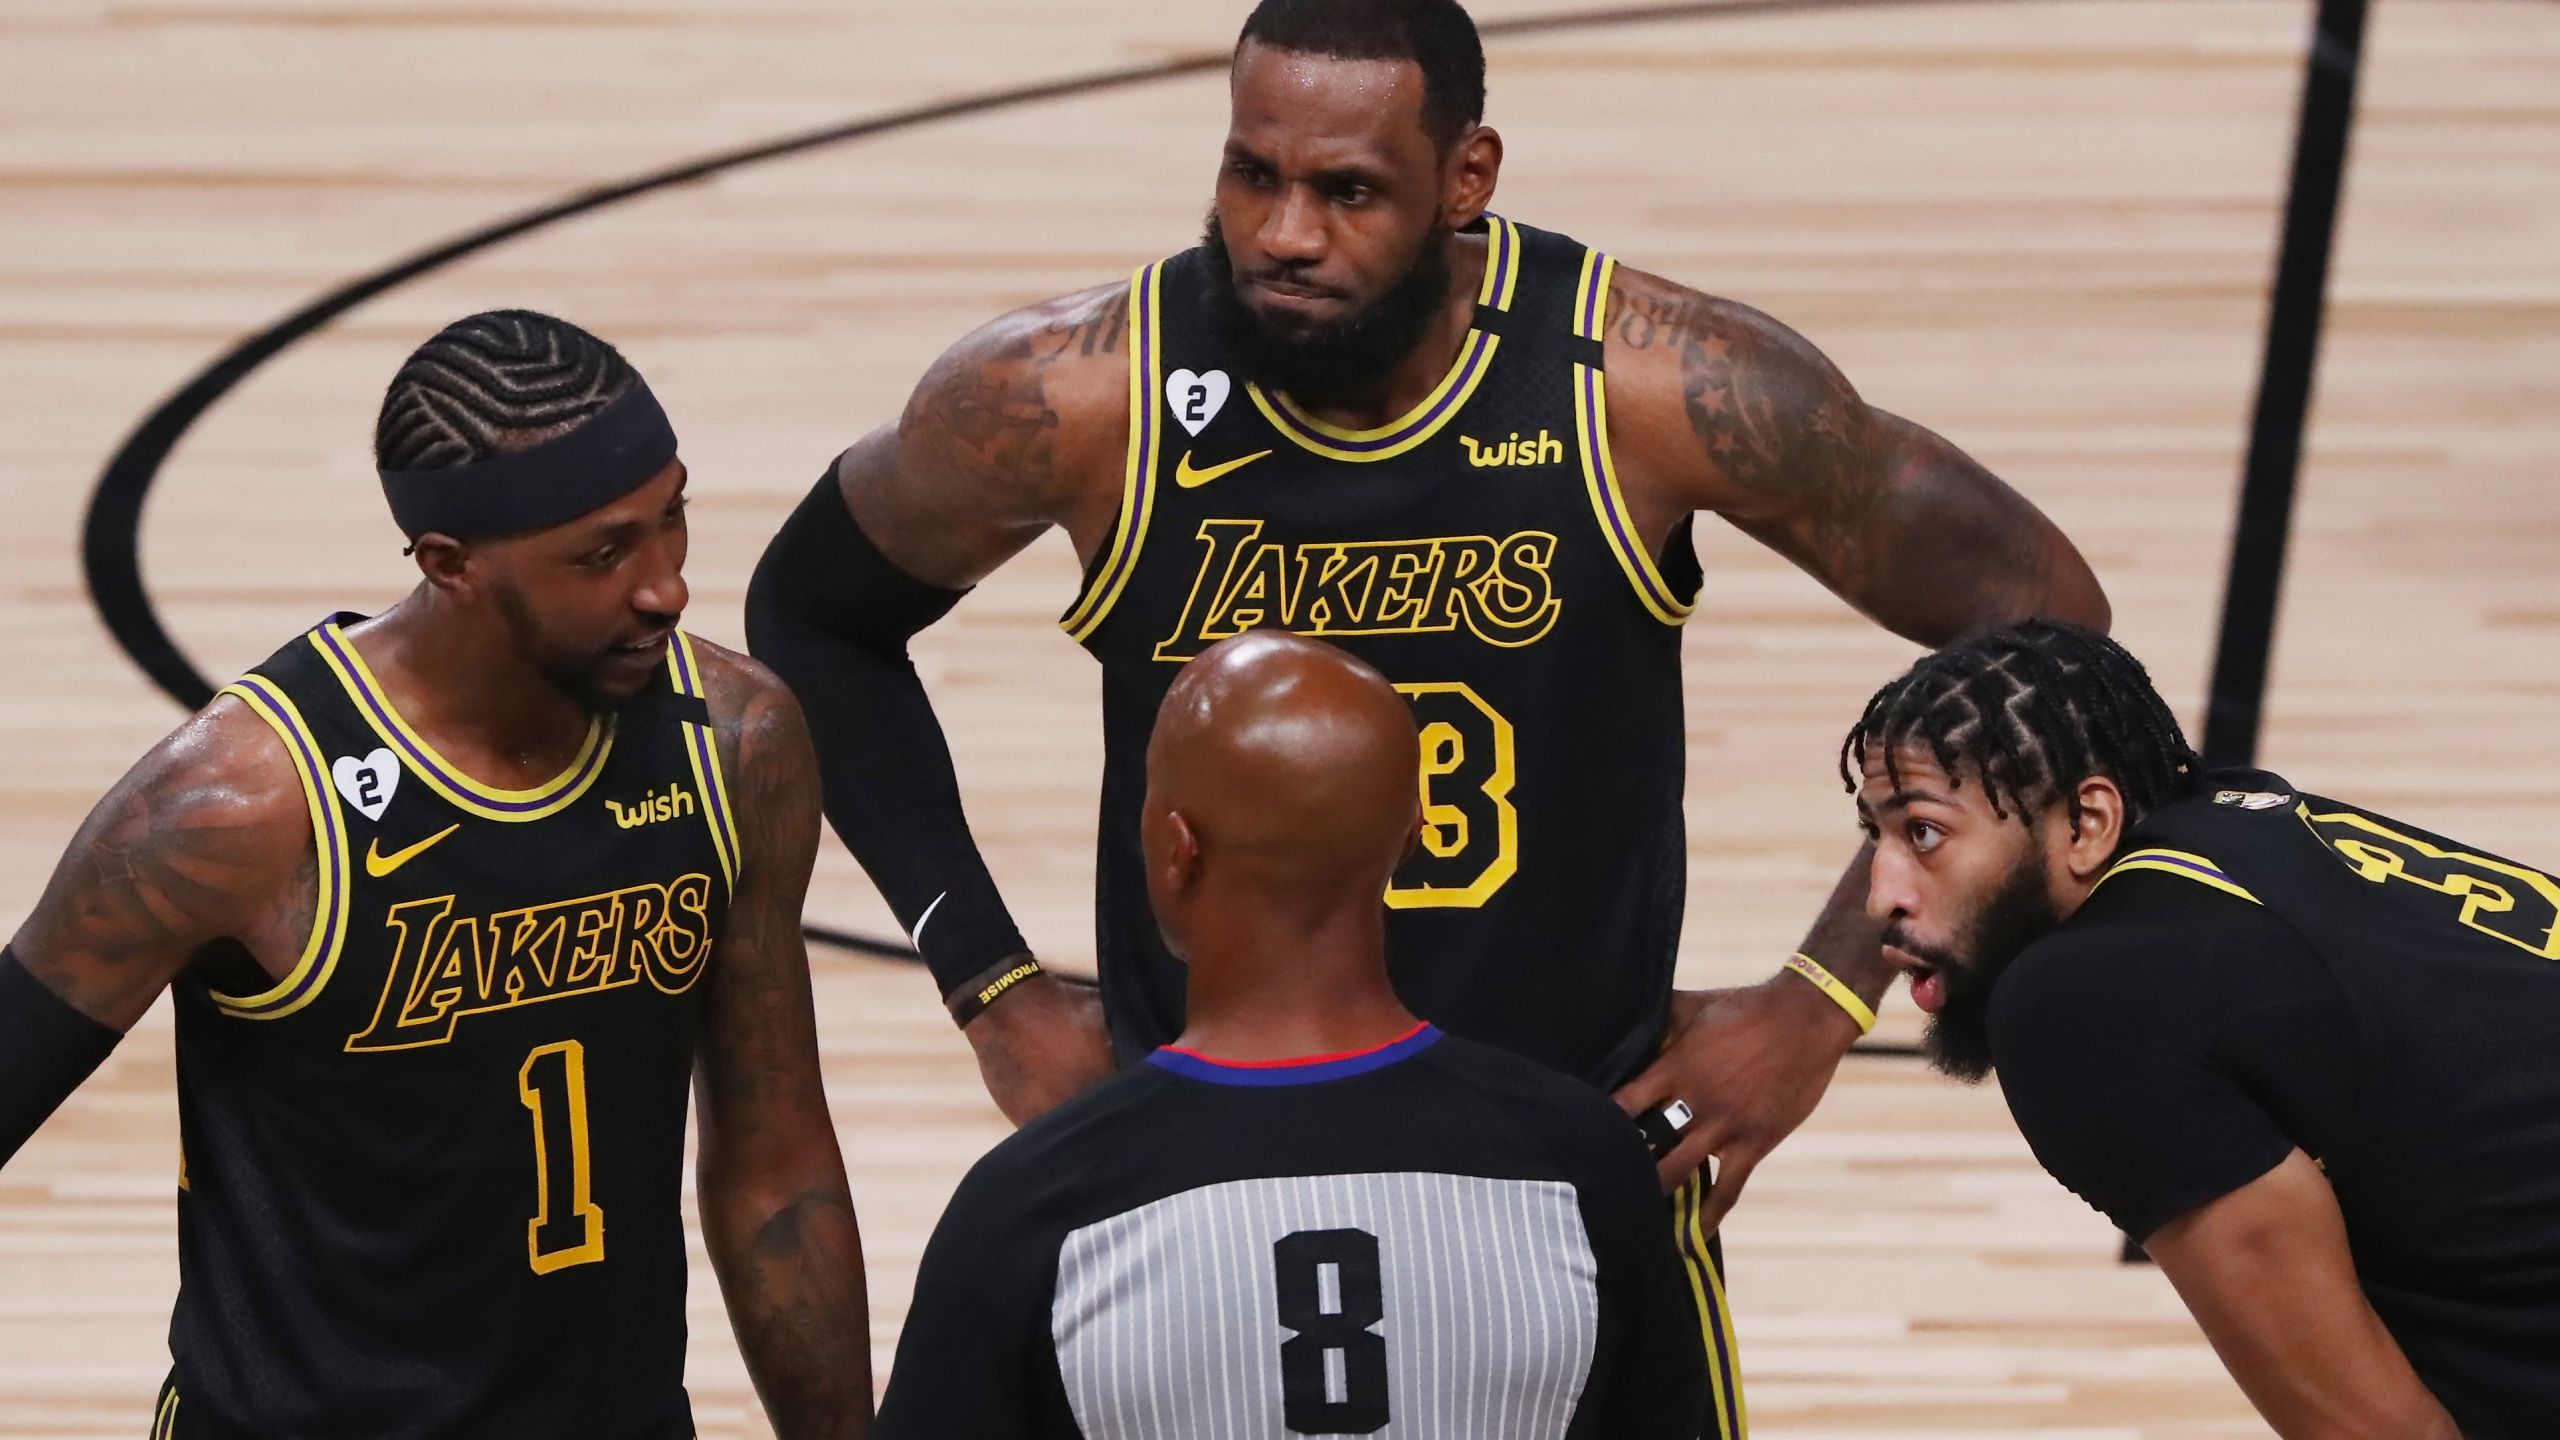 NBA Finals: What Time Is The Lakers Heat Game 6 On Sunday?